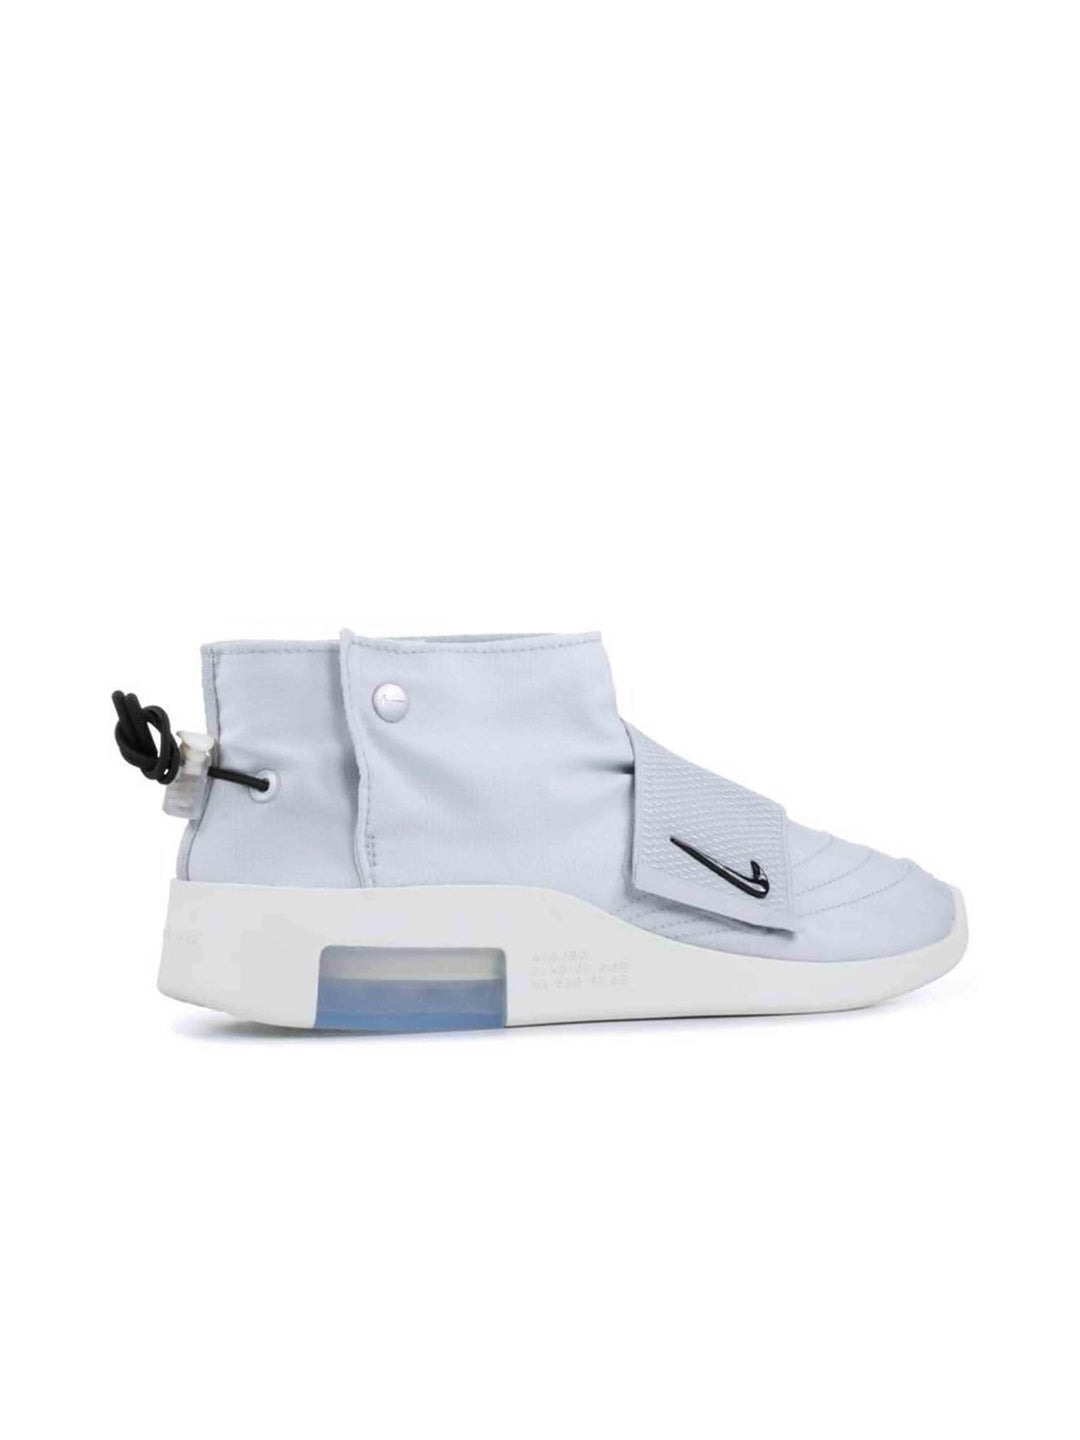 Nike Air Fear Of God Moccasin Pure Platinum Nike